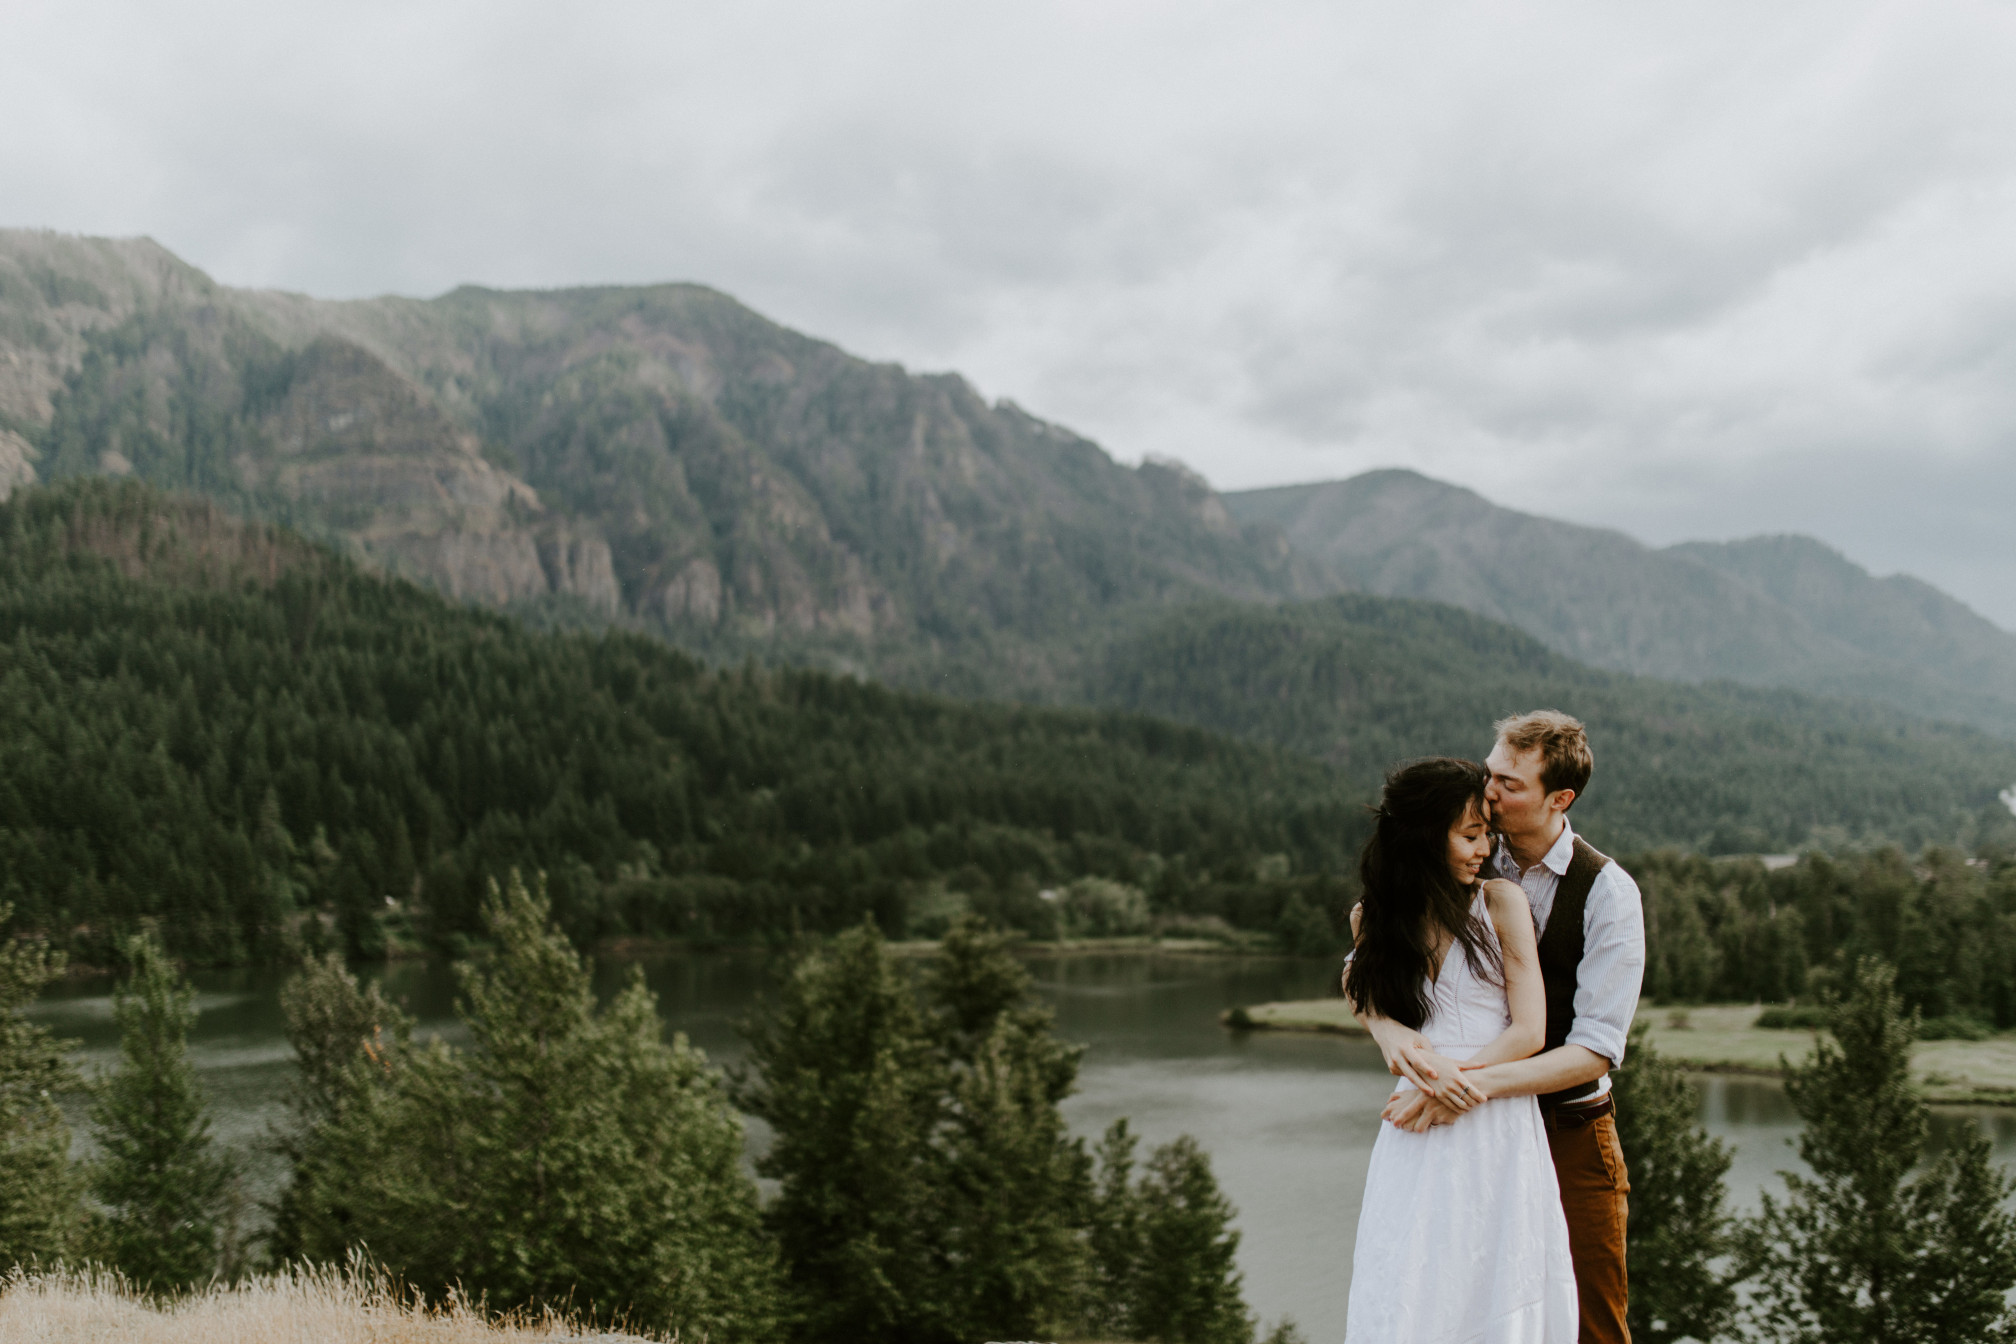 Kimberlie and Jacob stand together at Cascade Locks. Elopement wedding photography at Cascade Locks by Sienna Plus Josh.